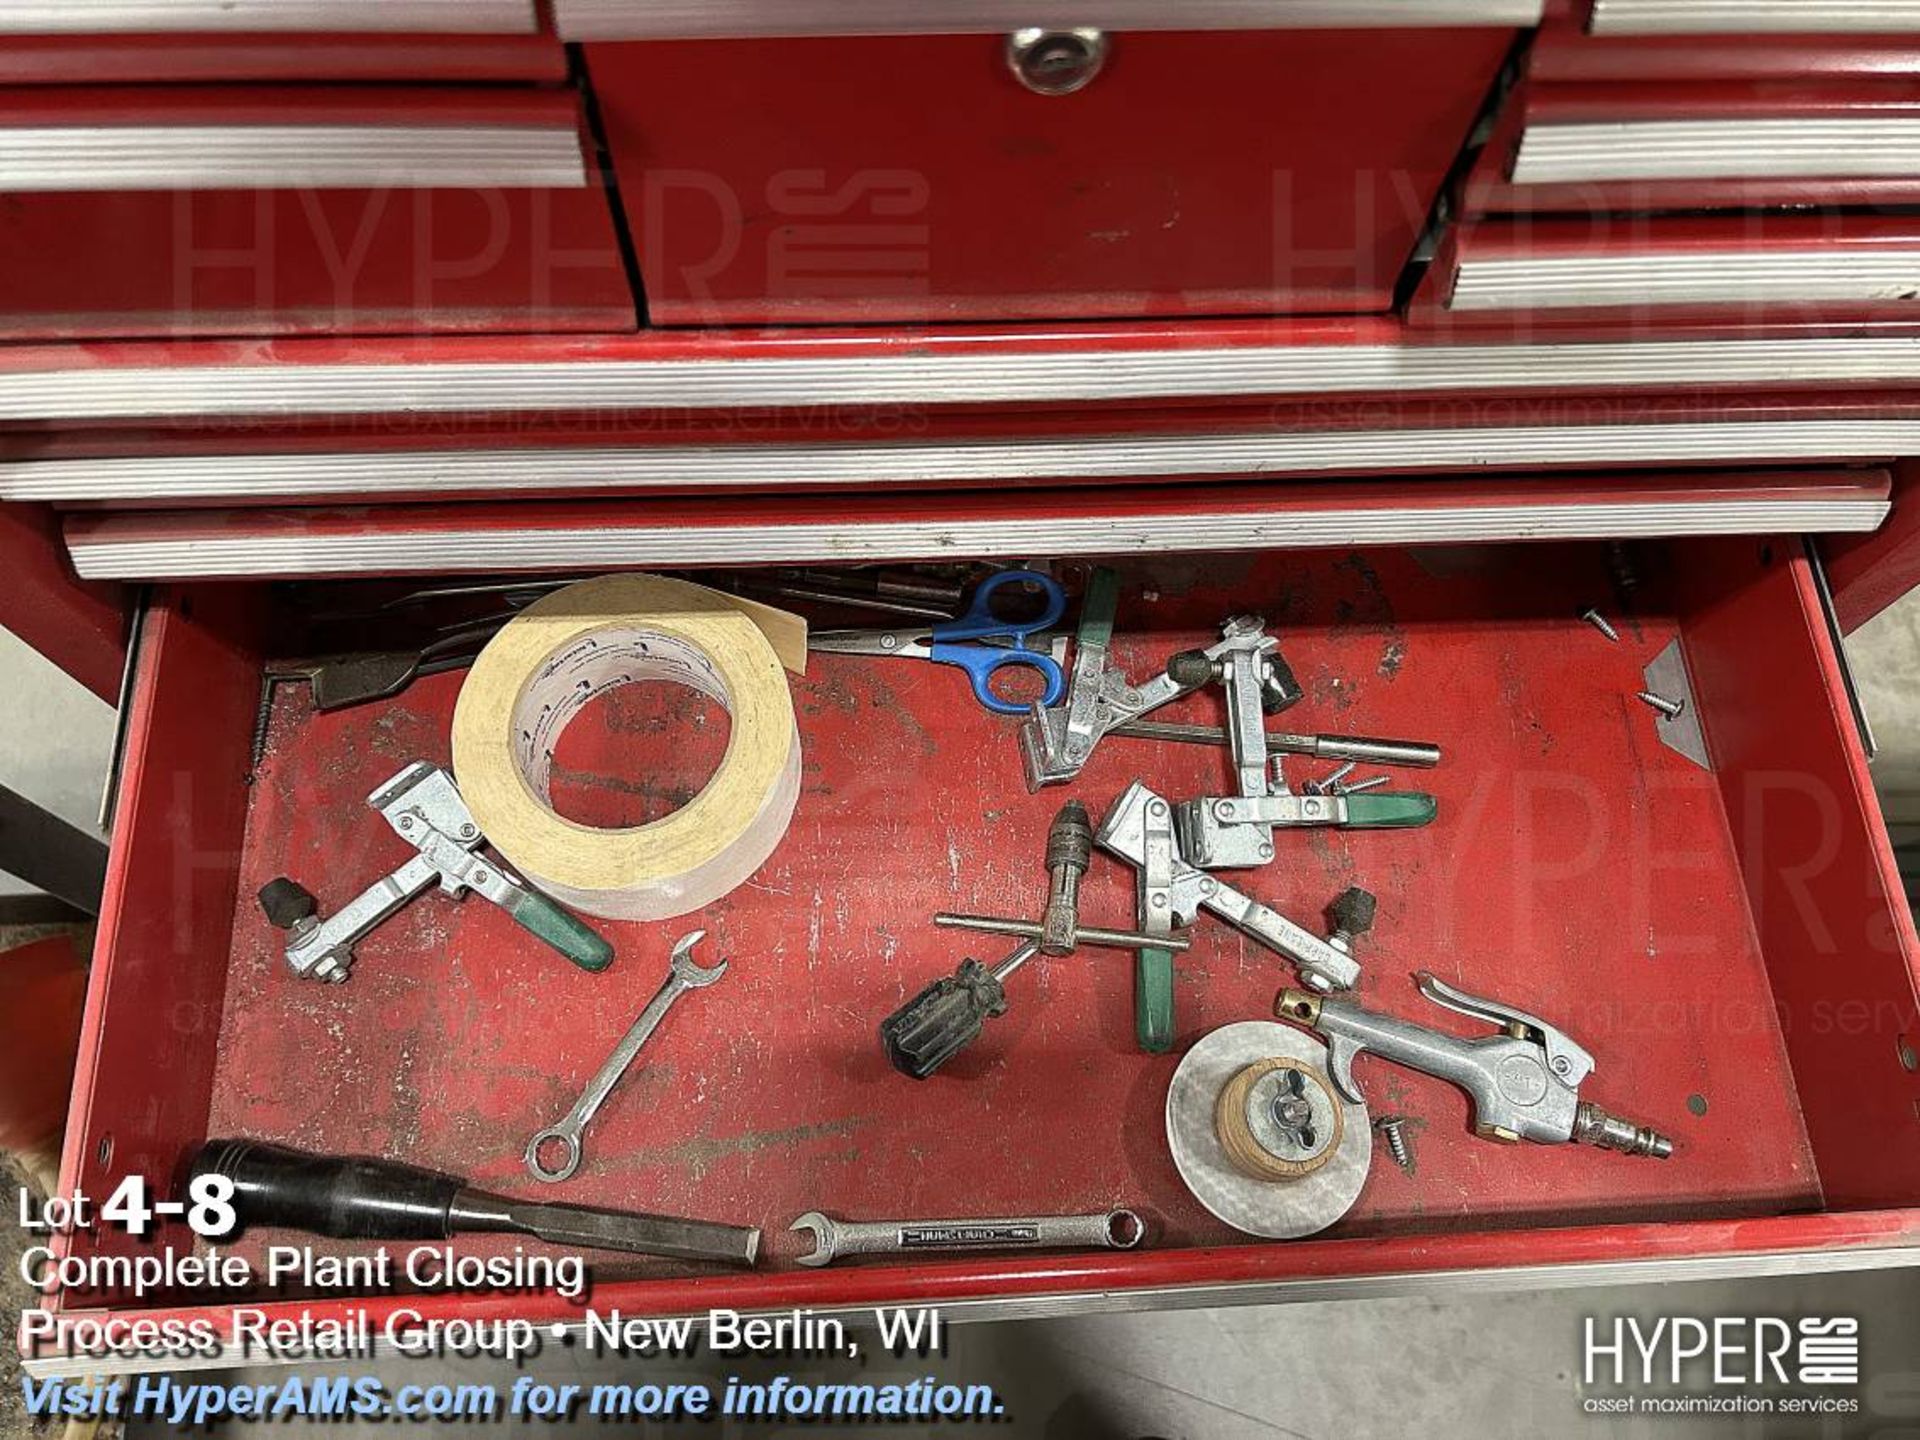 Stack-on roll around toolbox - Image 8 of 12